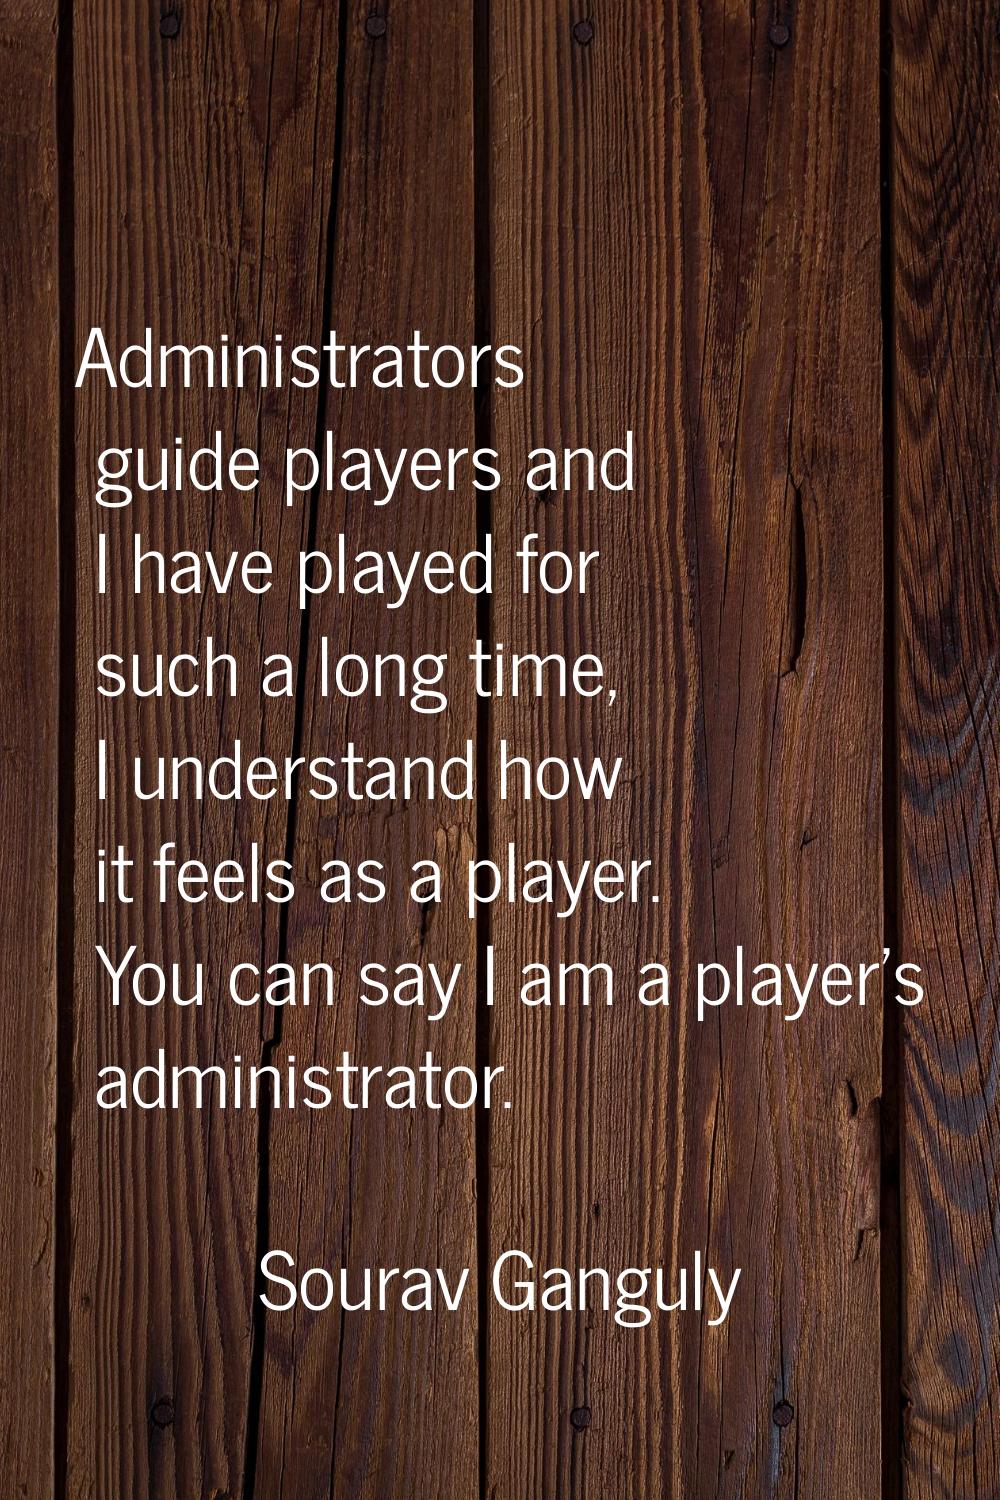 Administrators guide players and I have played for such a long time, I understand how it feels as a